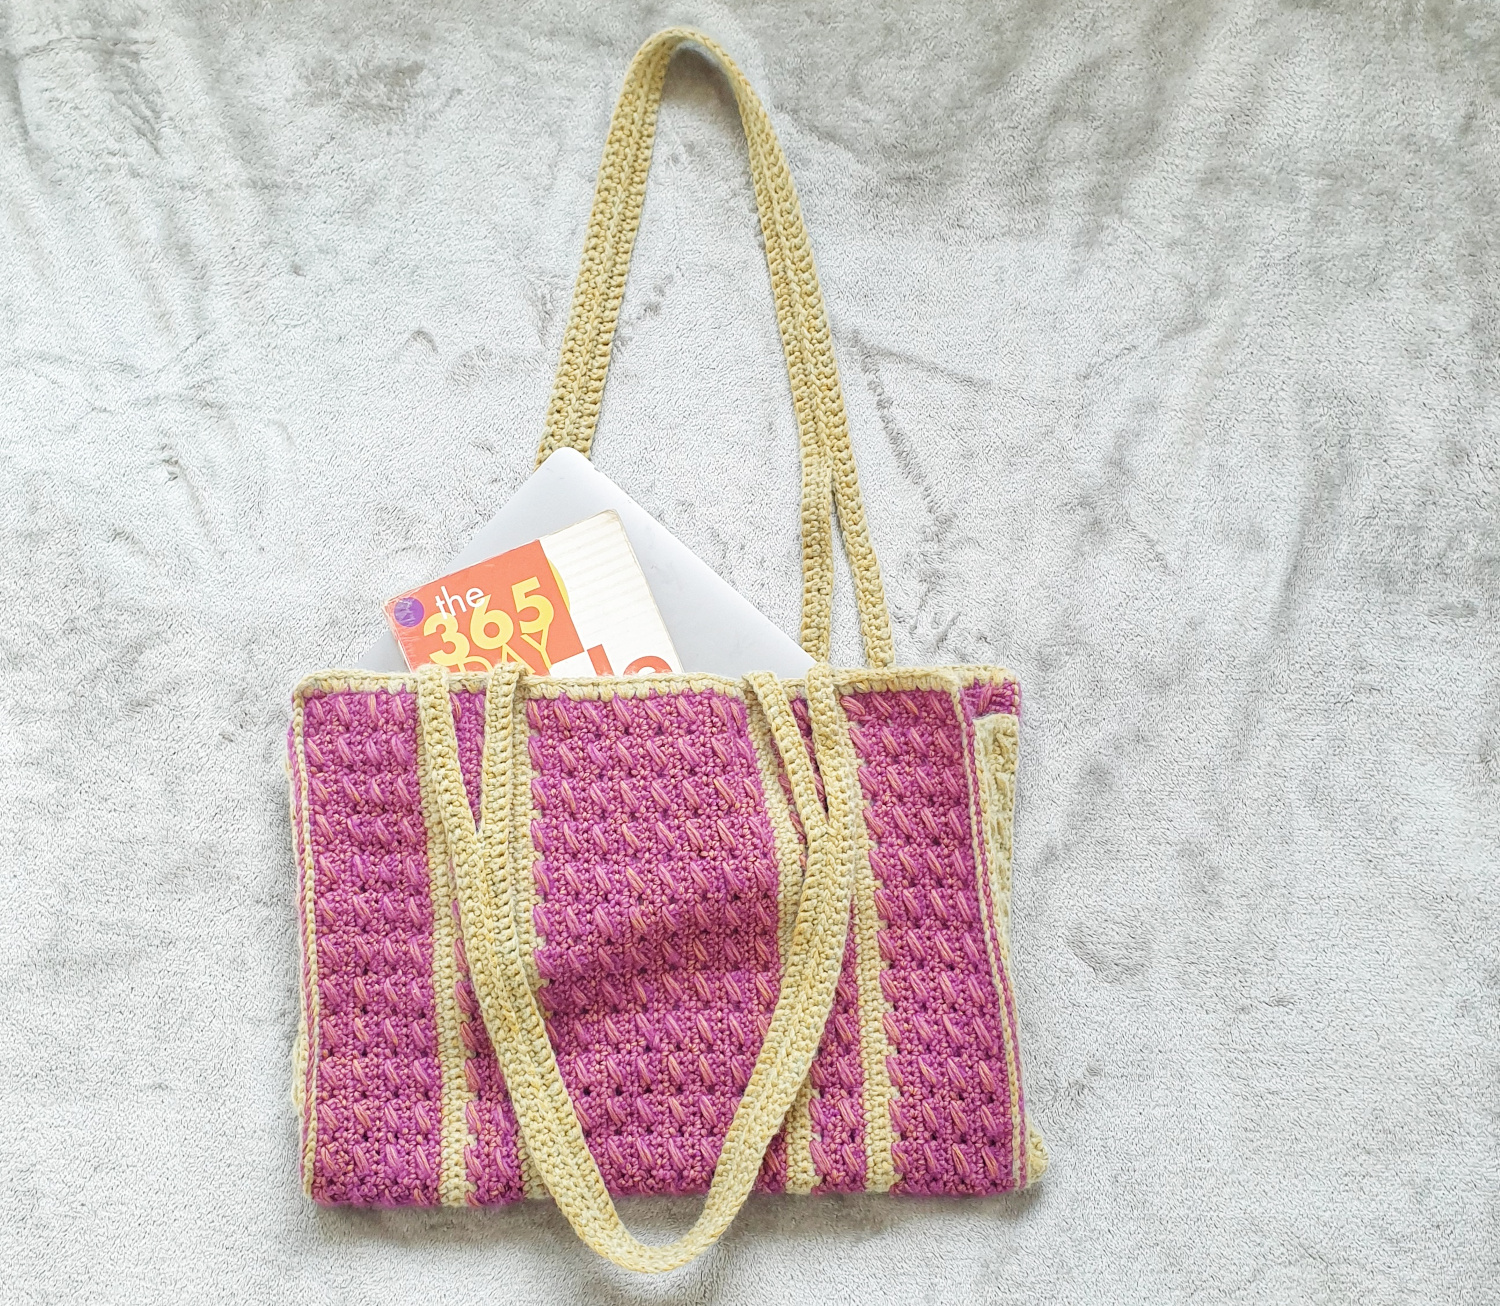 Reversible Carry-All Crochet Tote Bag- Free Pattern